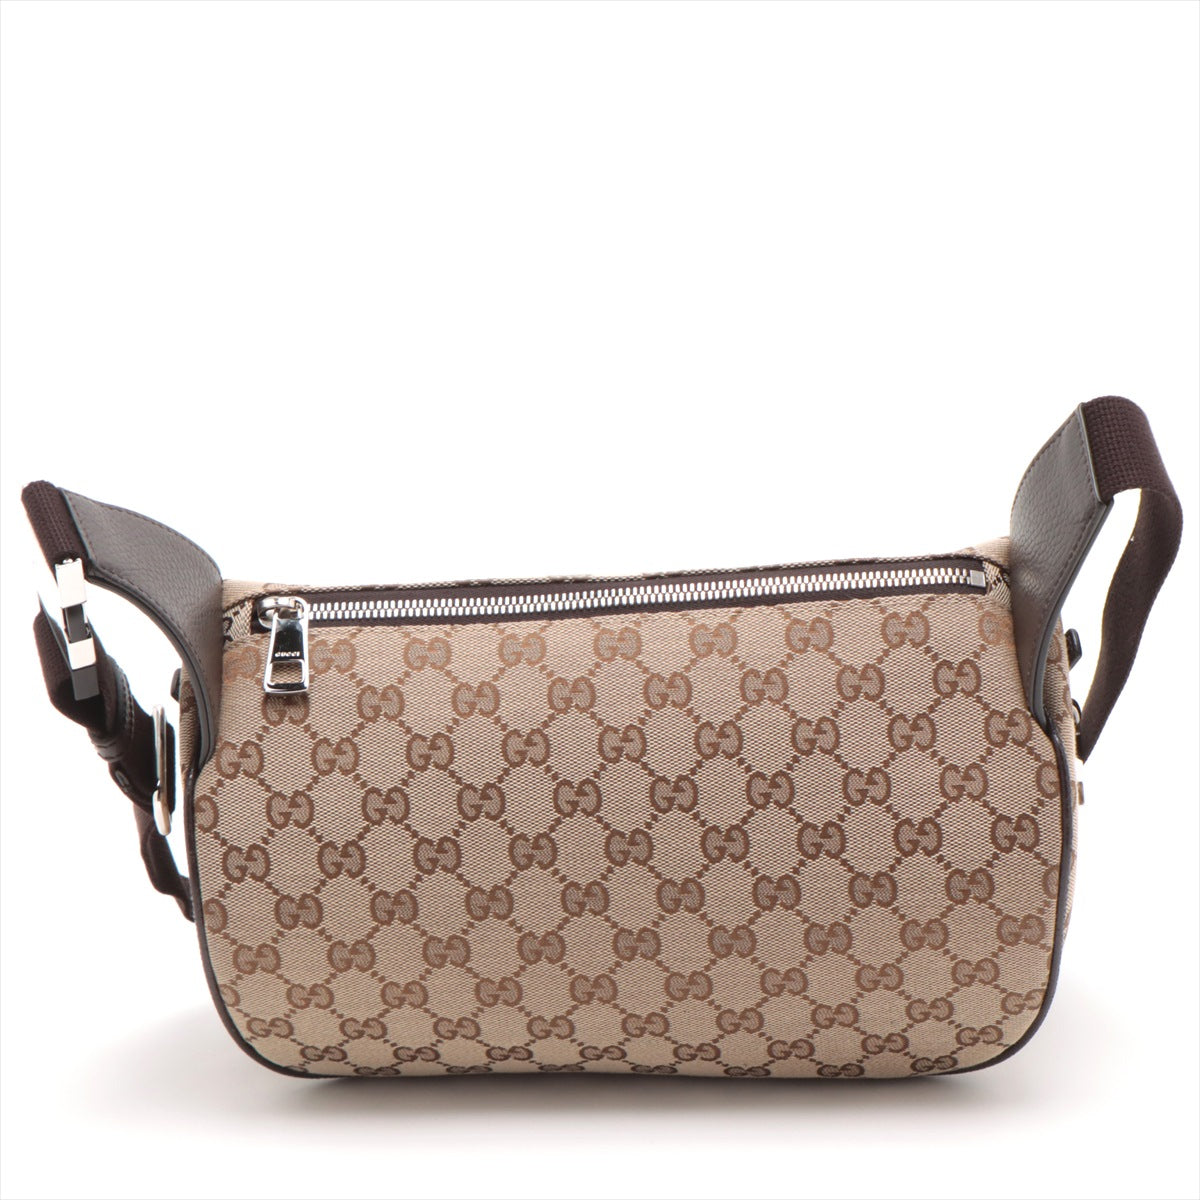 Gucci GG canvas body bag beige 630915 outlet mark